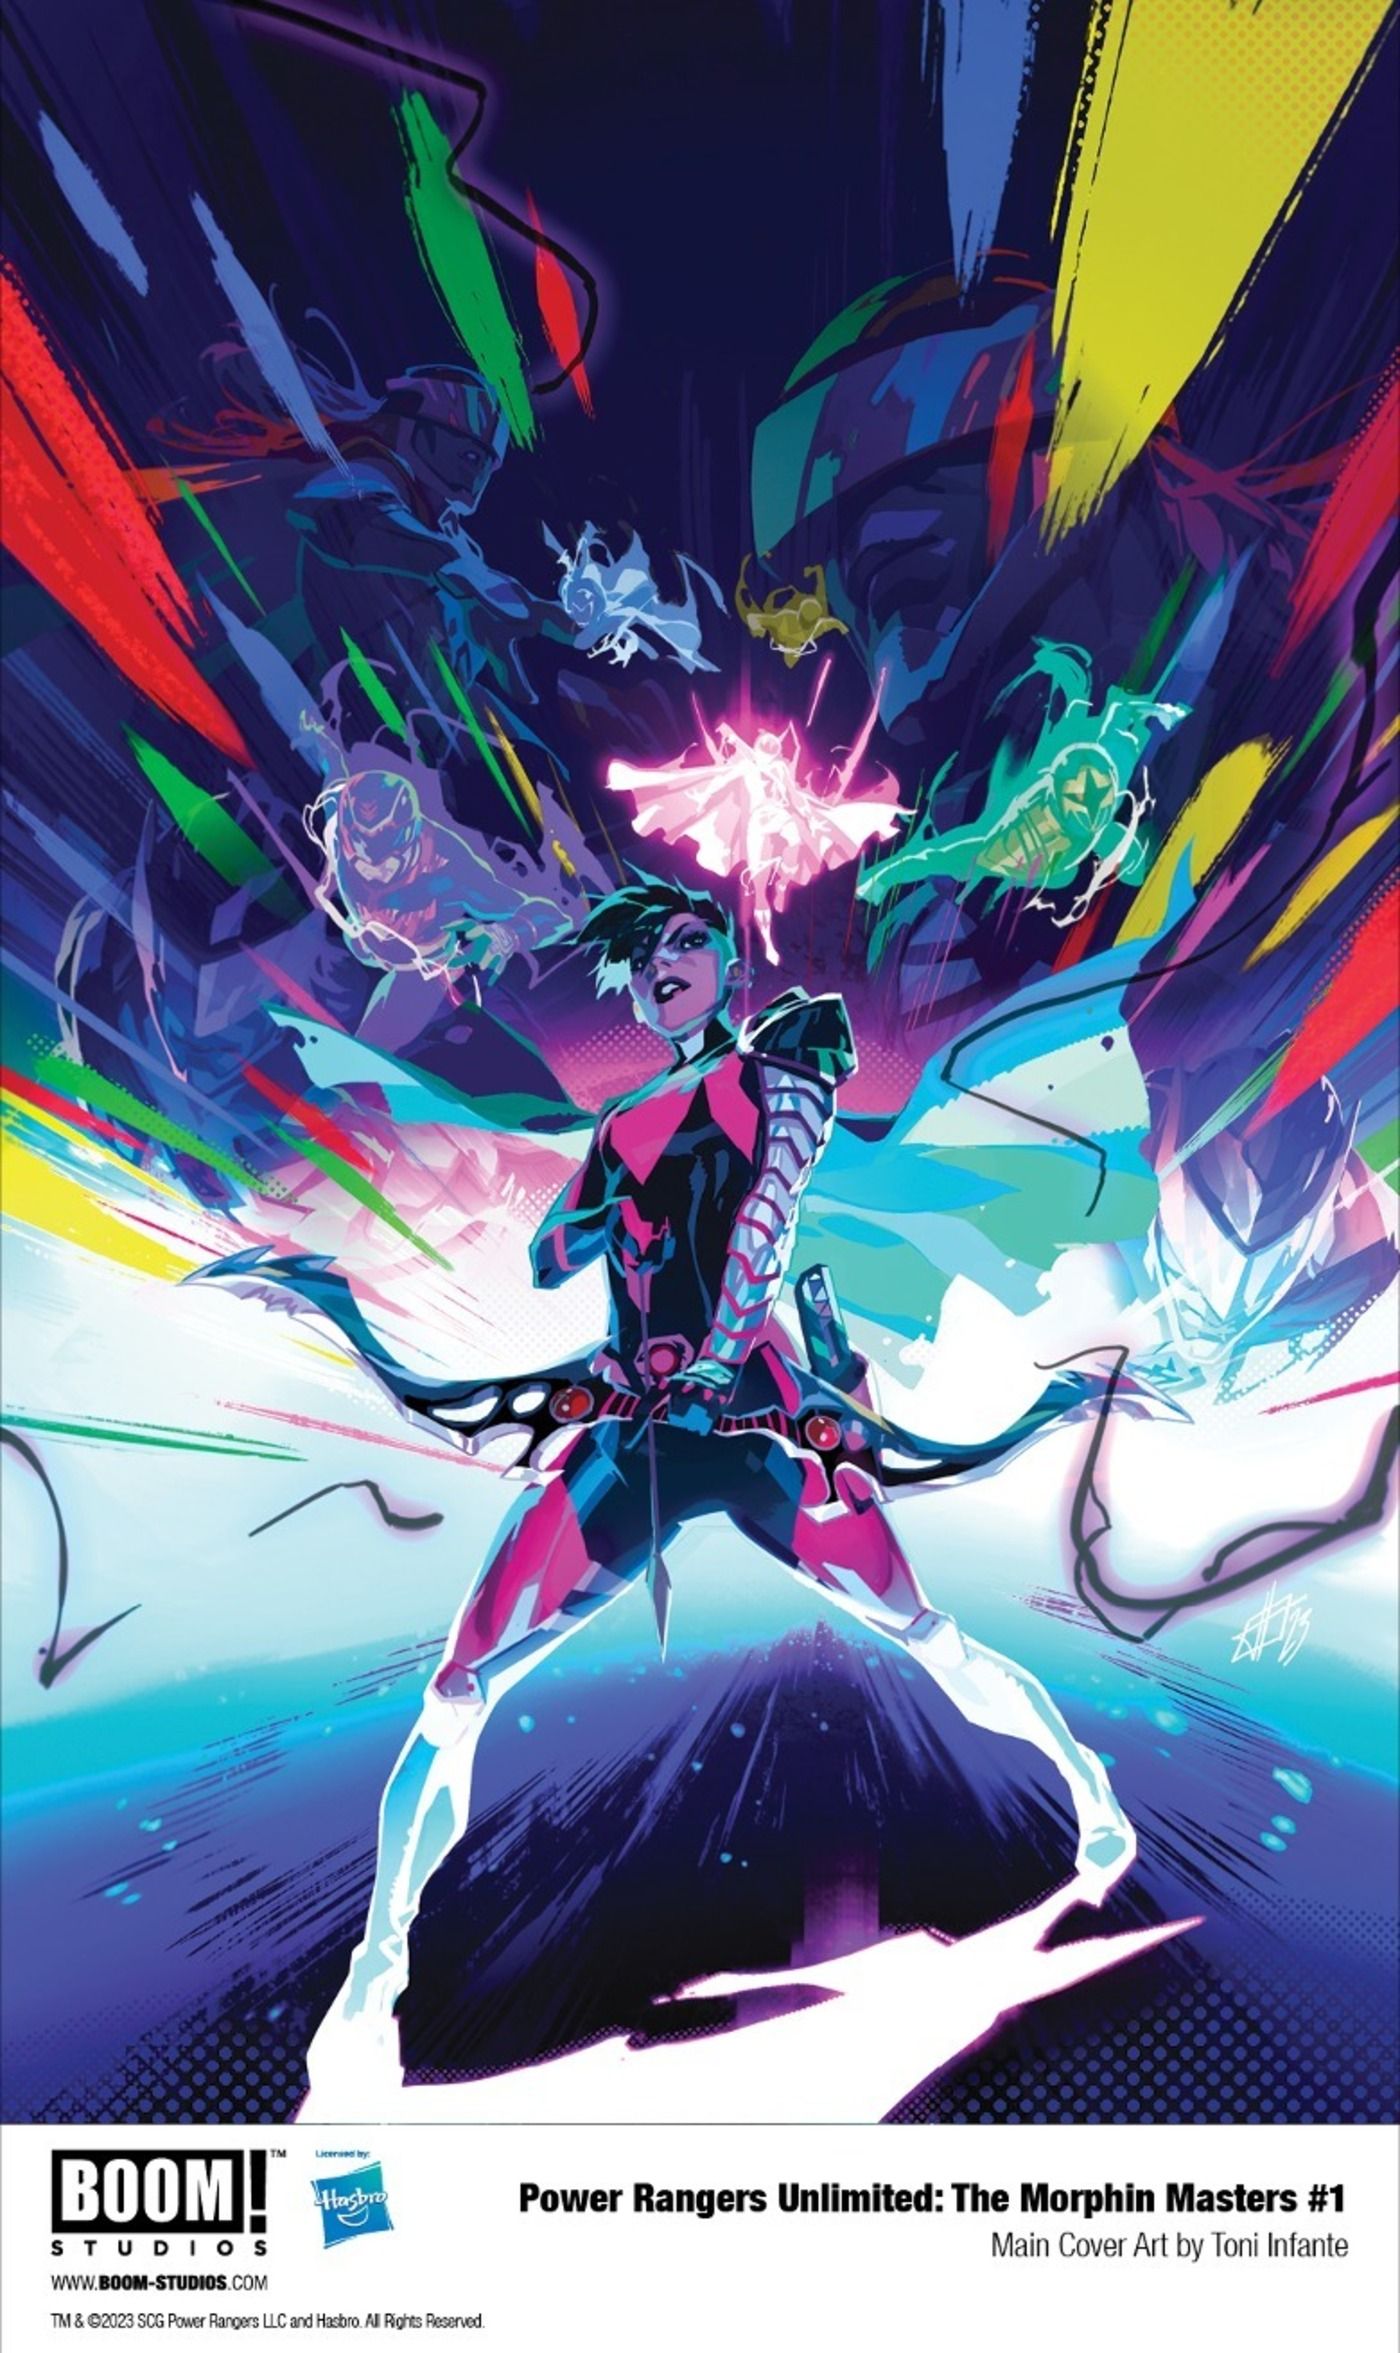 Power Rangers Unlimited: The Morphin' Masters #1, sampul Toni Infante